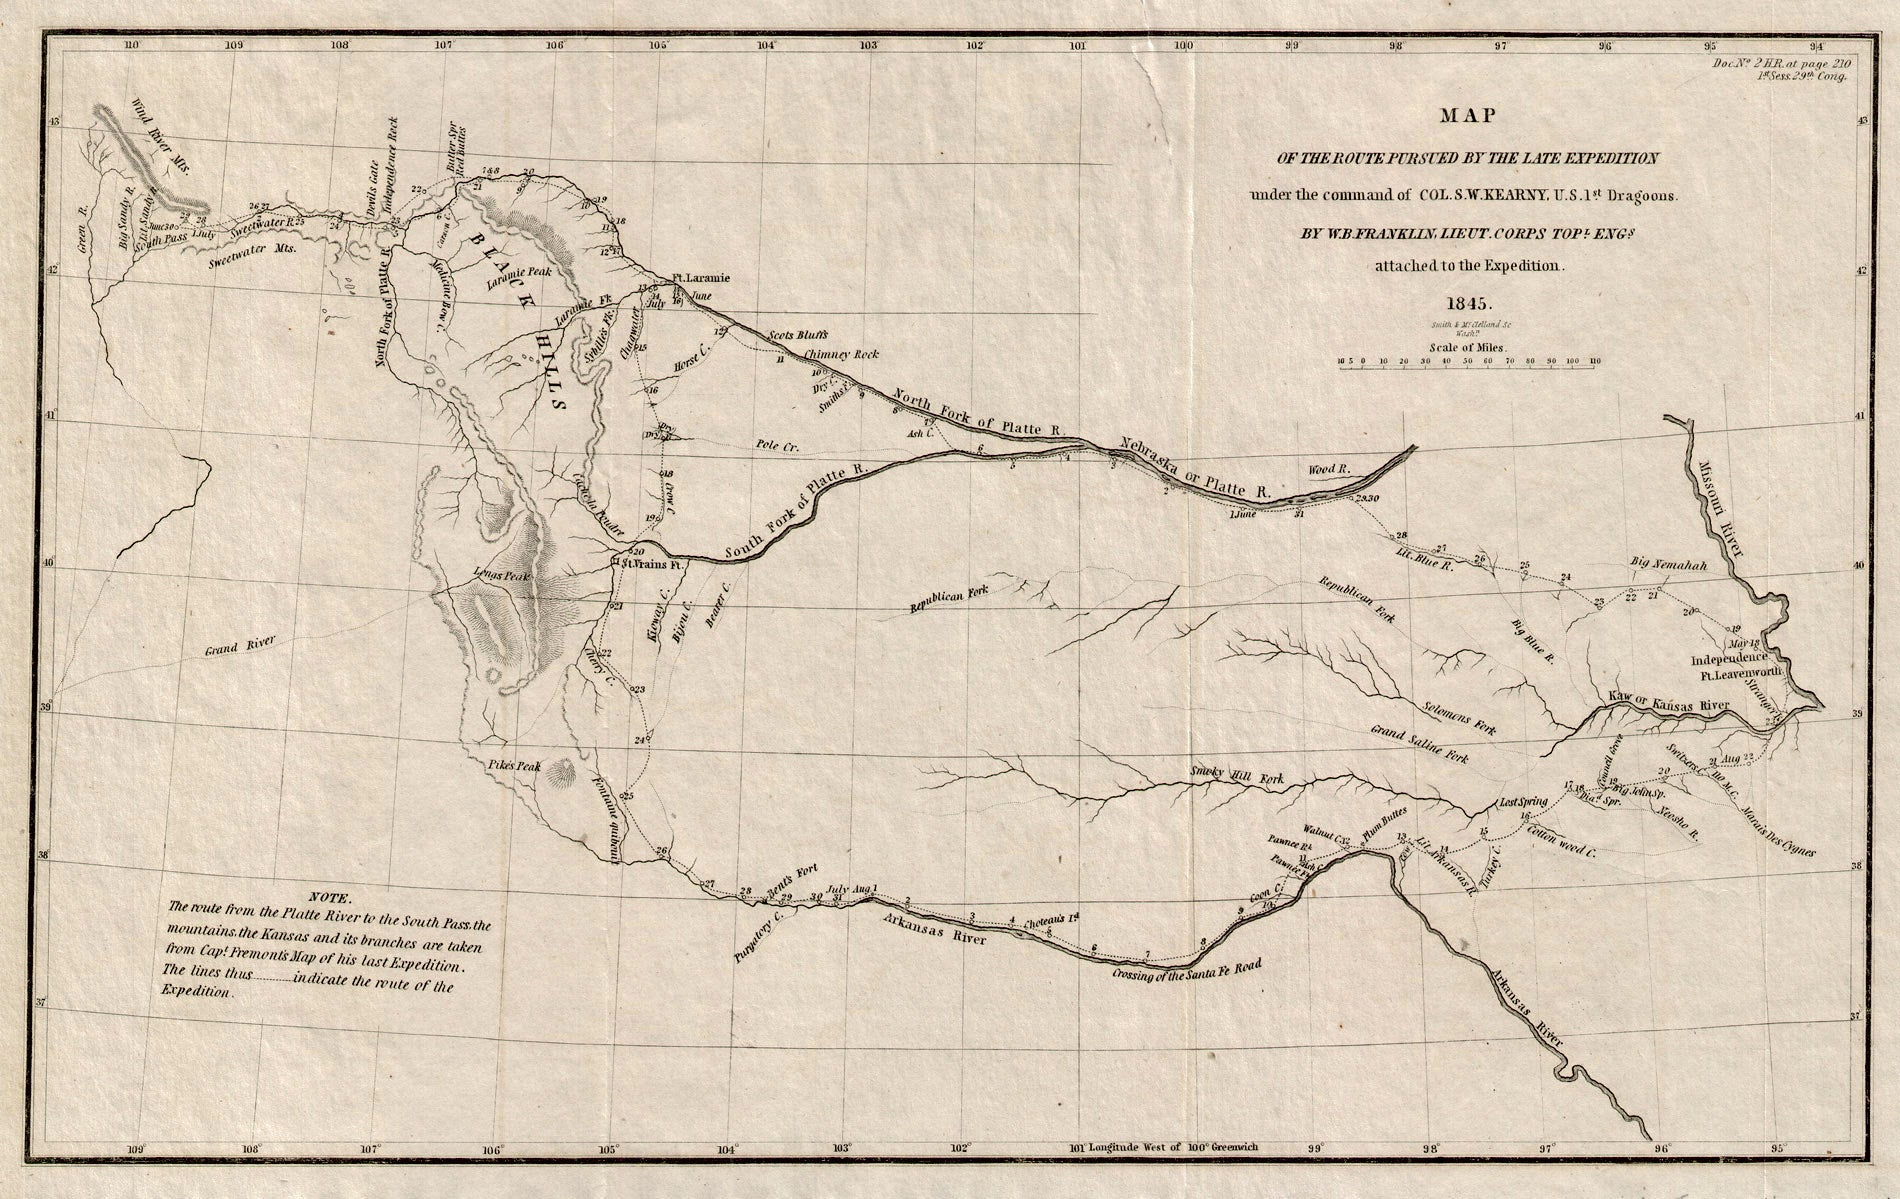 (WEST-EXPLORATIONS) Map of the Route Pursued by the Late Expedition under the Command of Col. S. W. Kearny